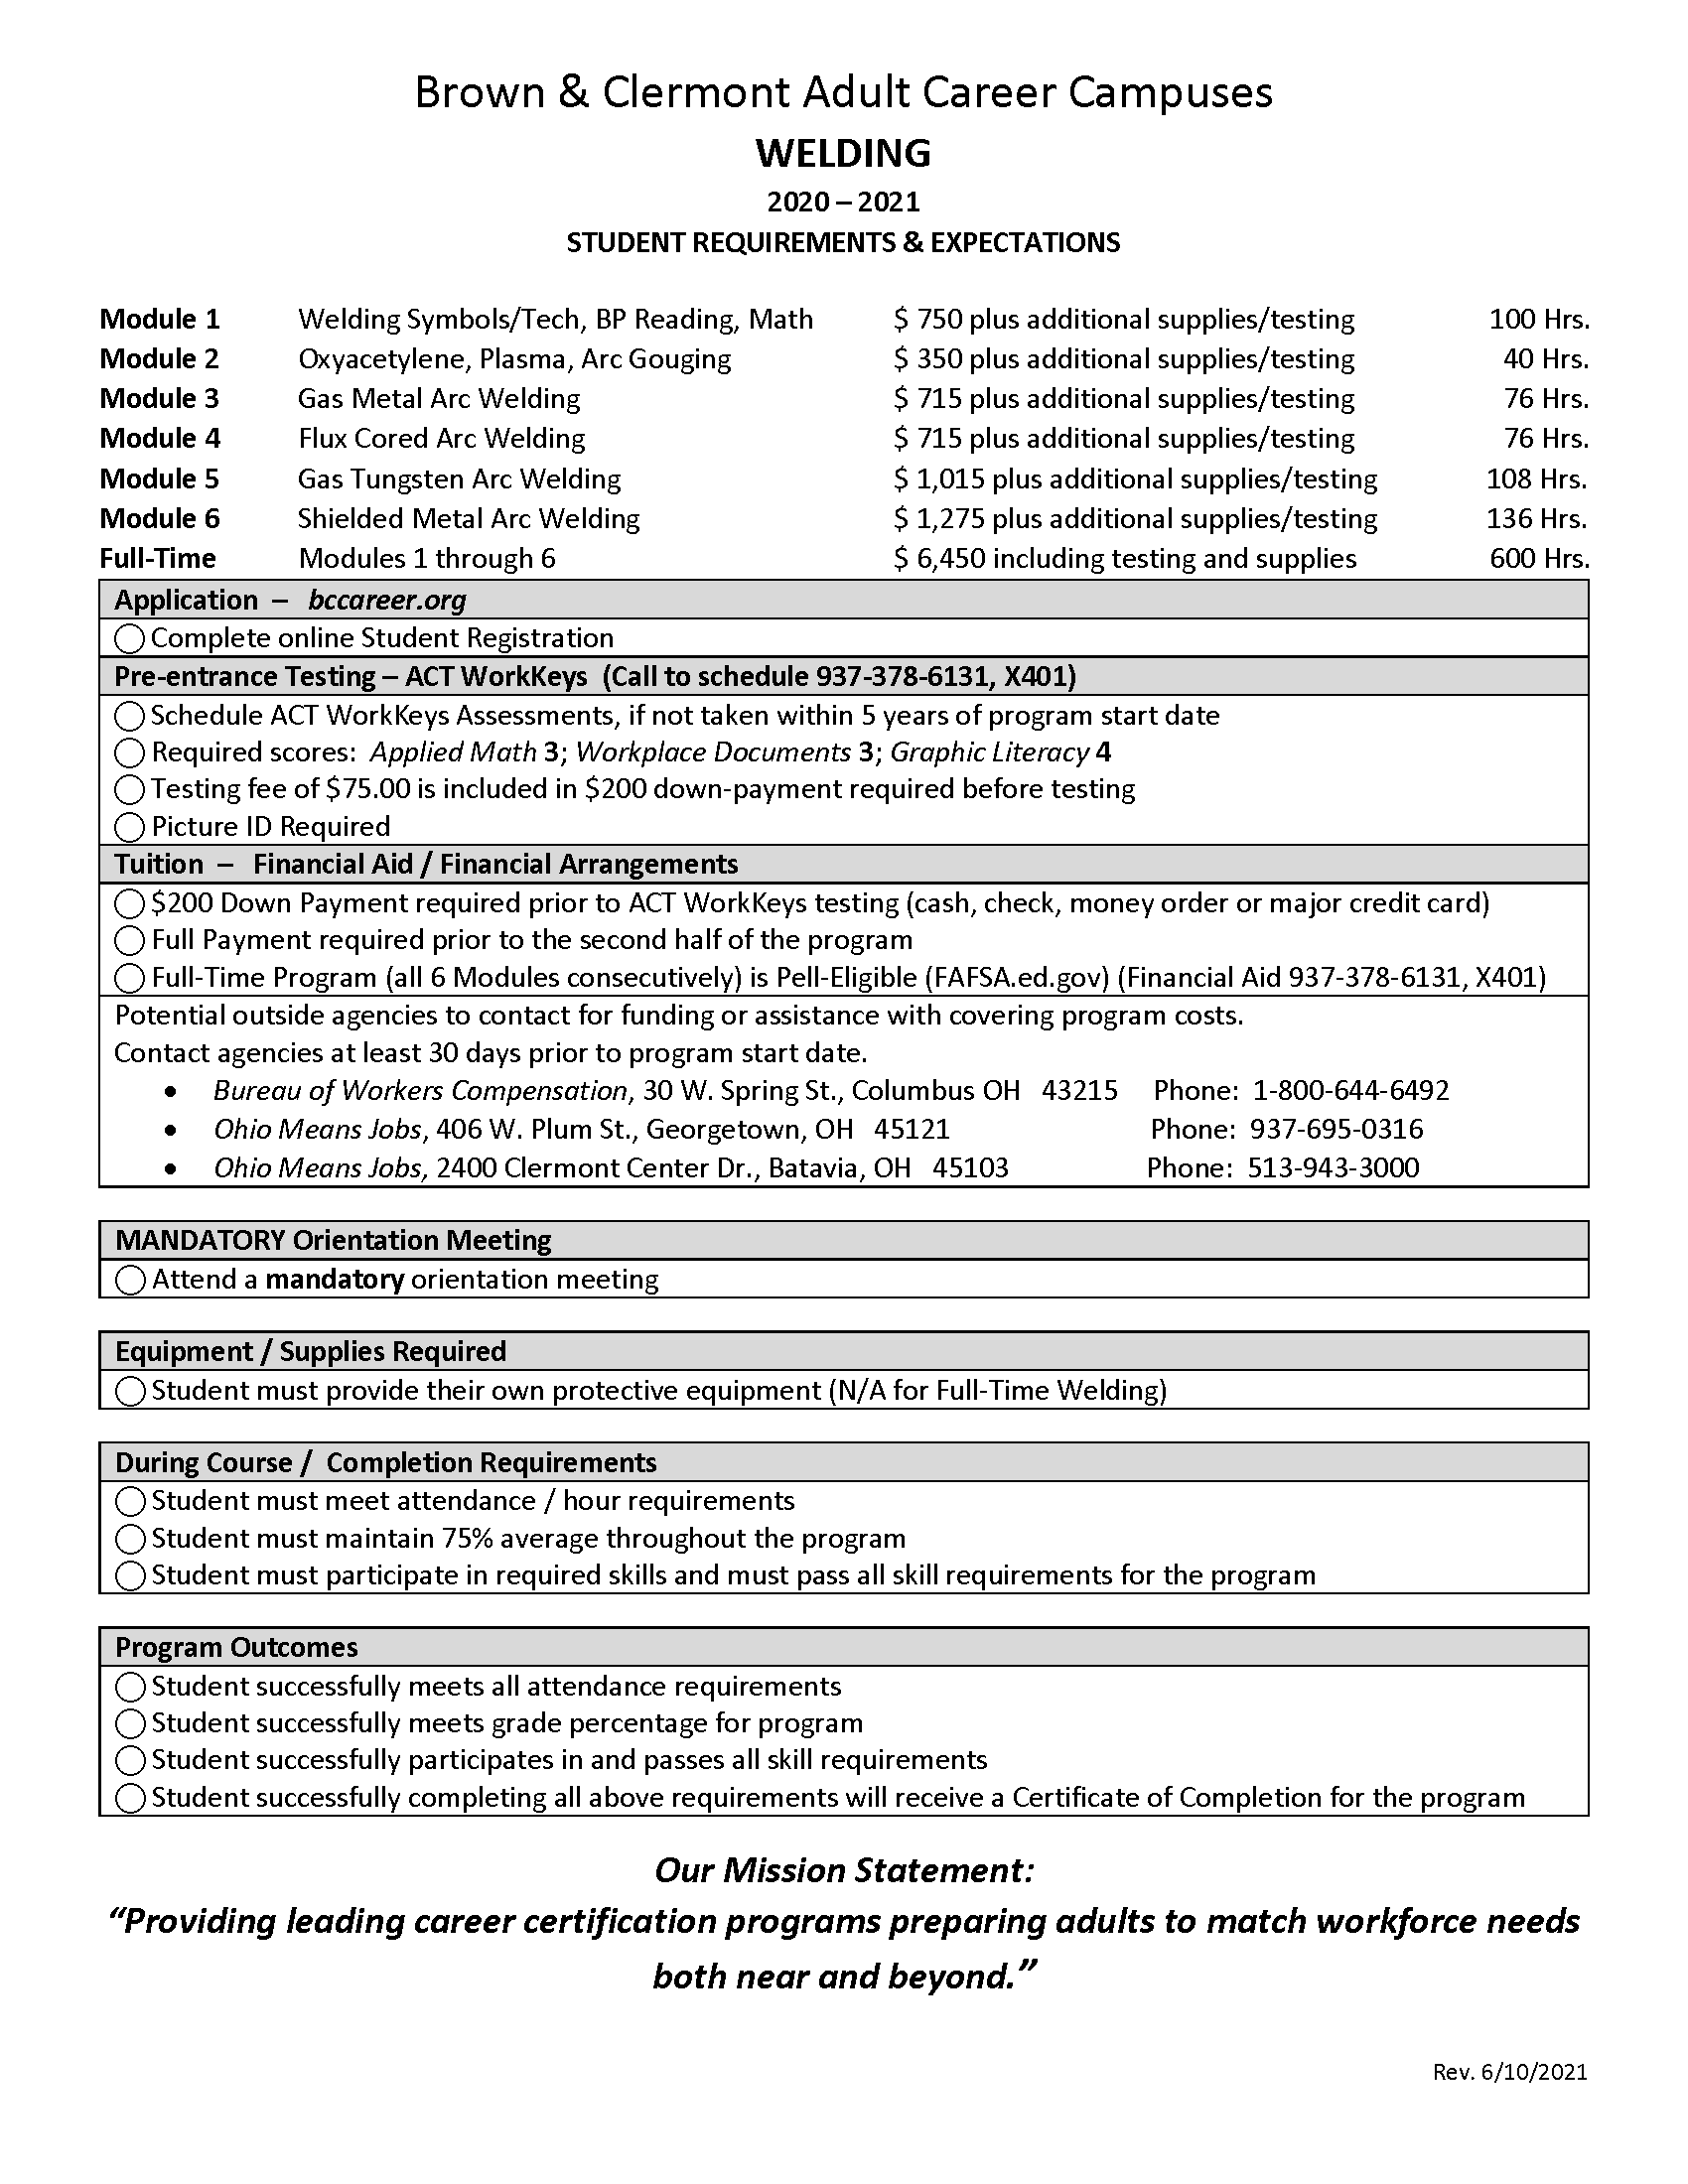 Welding Student Expectations and Requirements Sheet